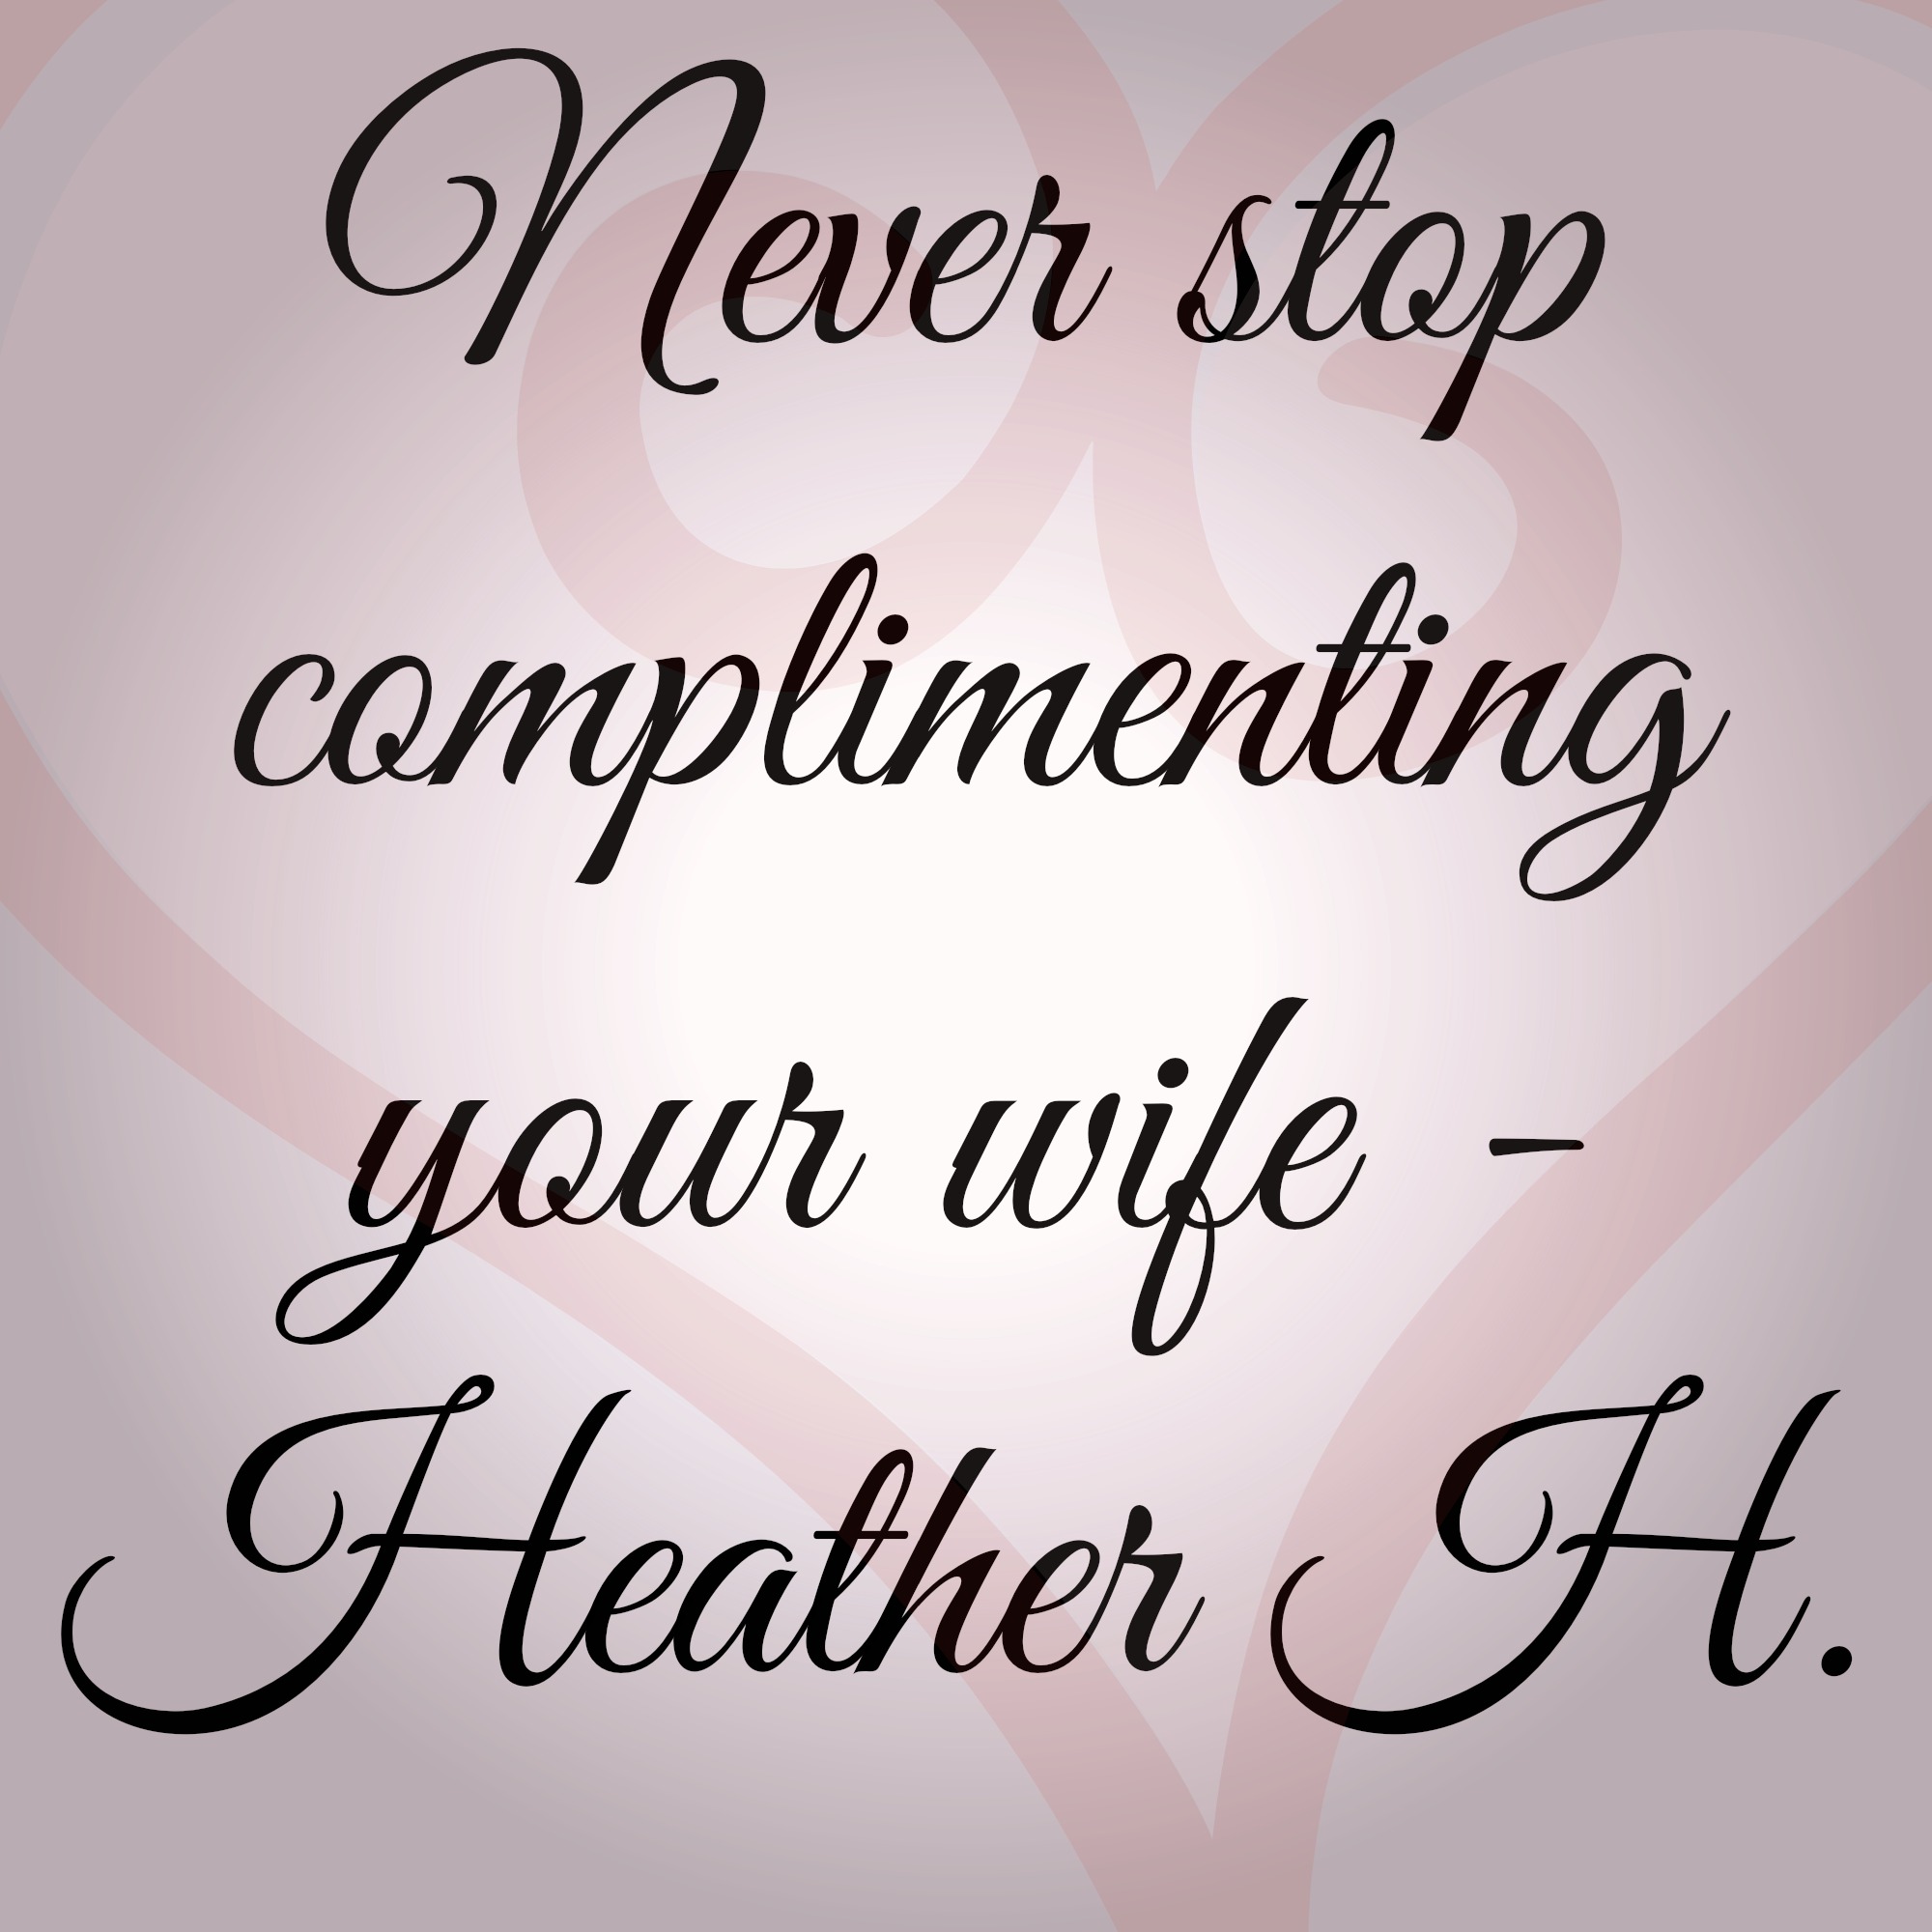 Never stop complimenting your wife.